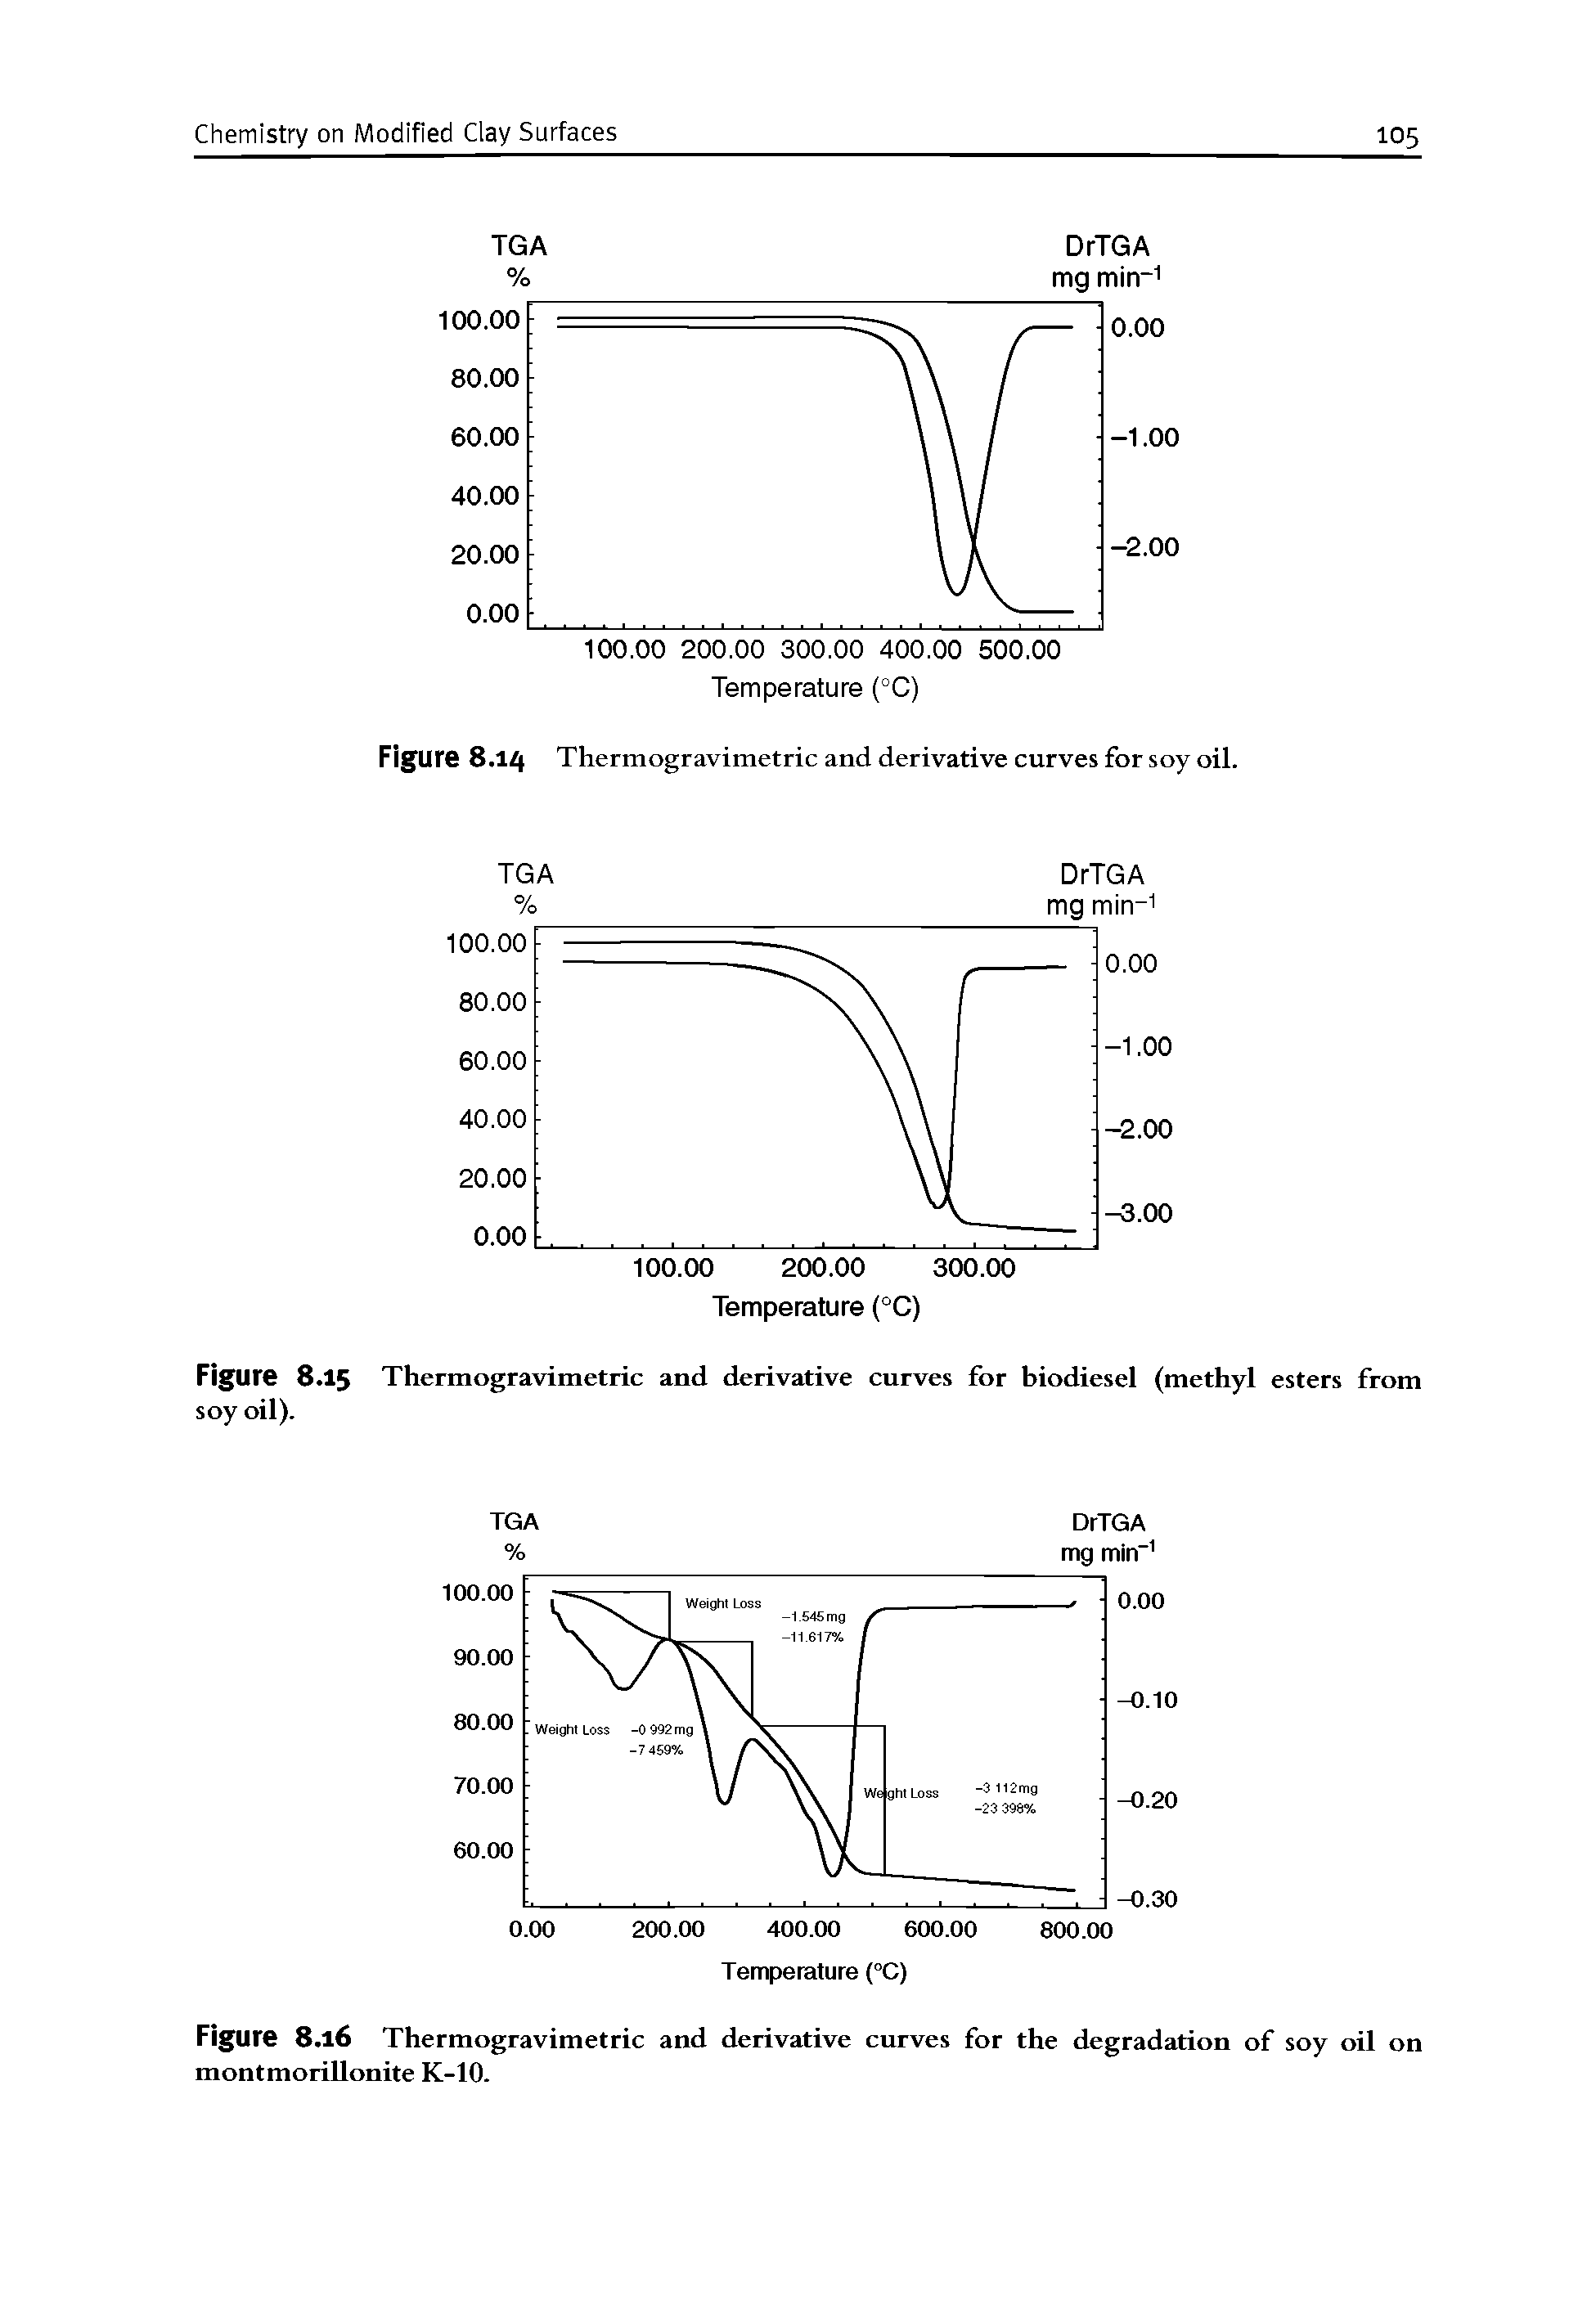 Figure 8.15 Thermogravimetric and derivative curves for biodiesel (methyl esters from soy oil).